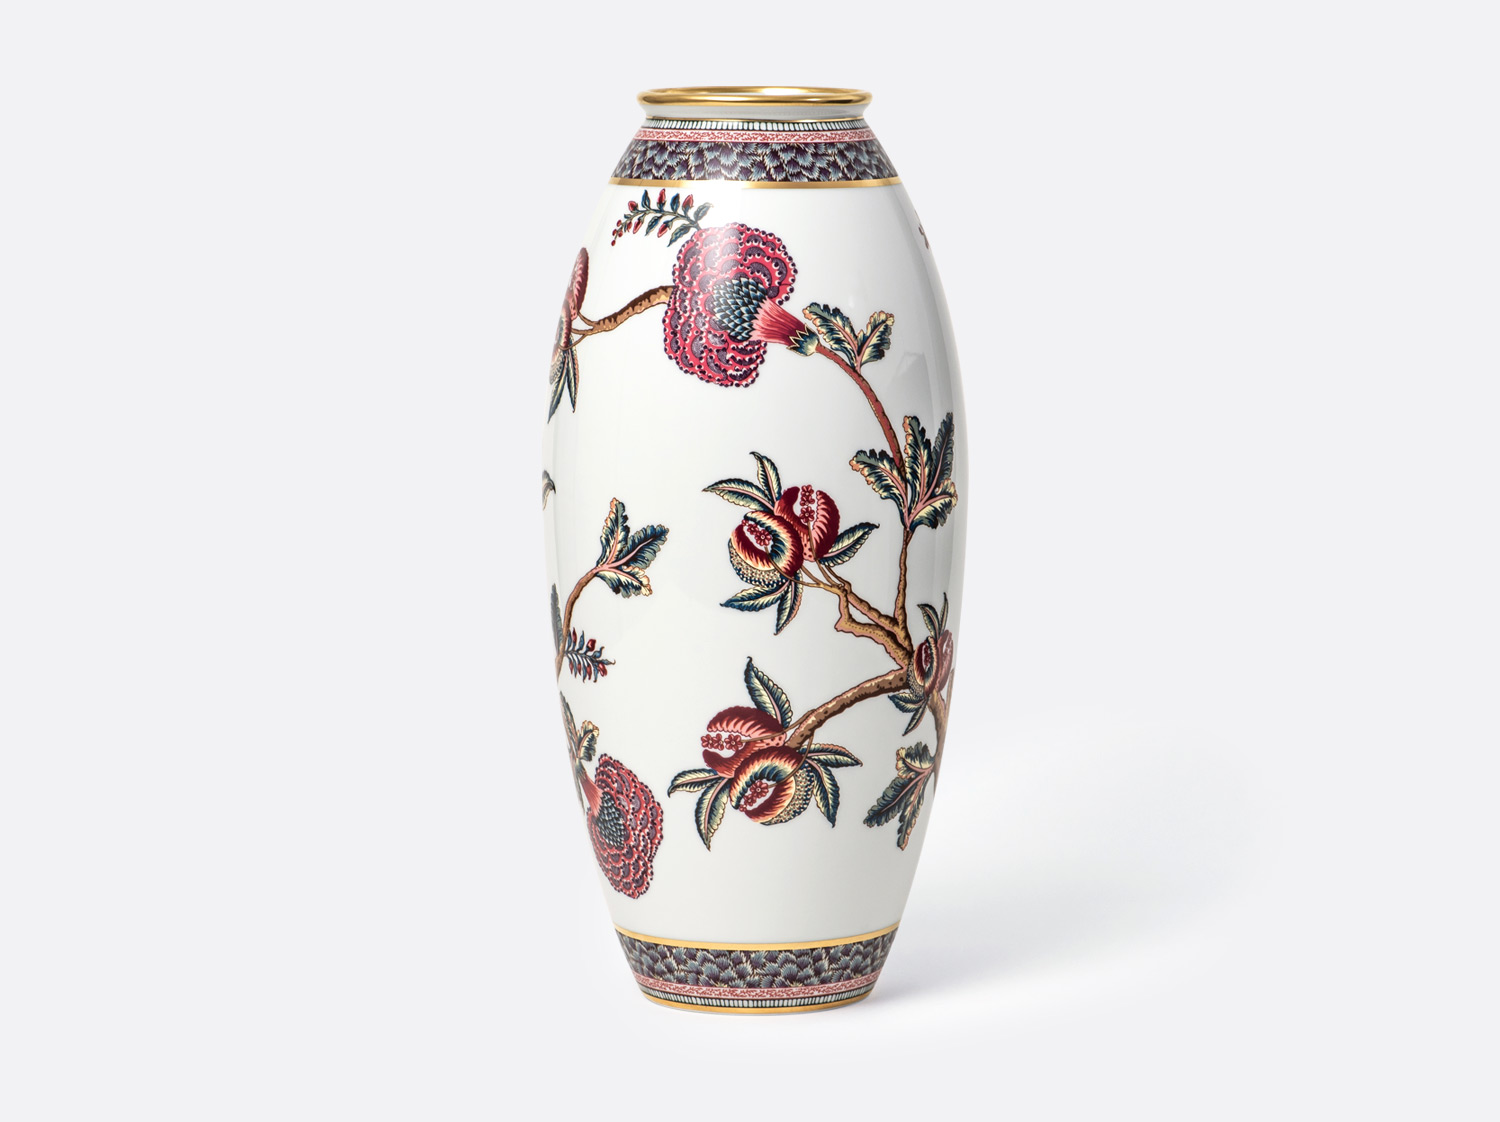 China Vase H. 16.5" of the collection Collection Braquenié | Bernardaud